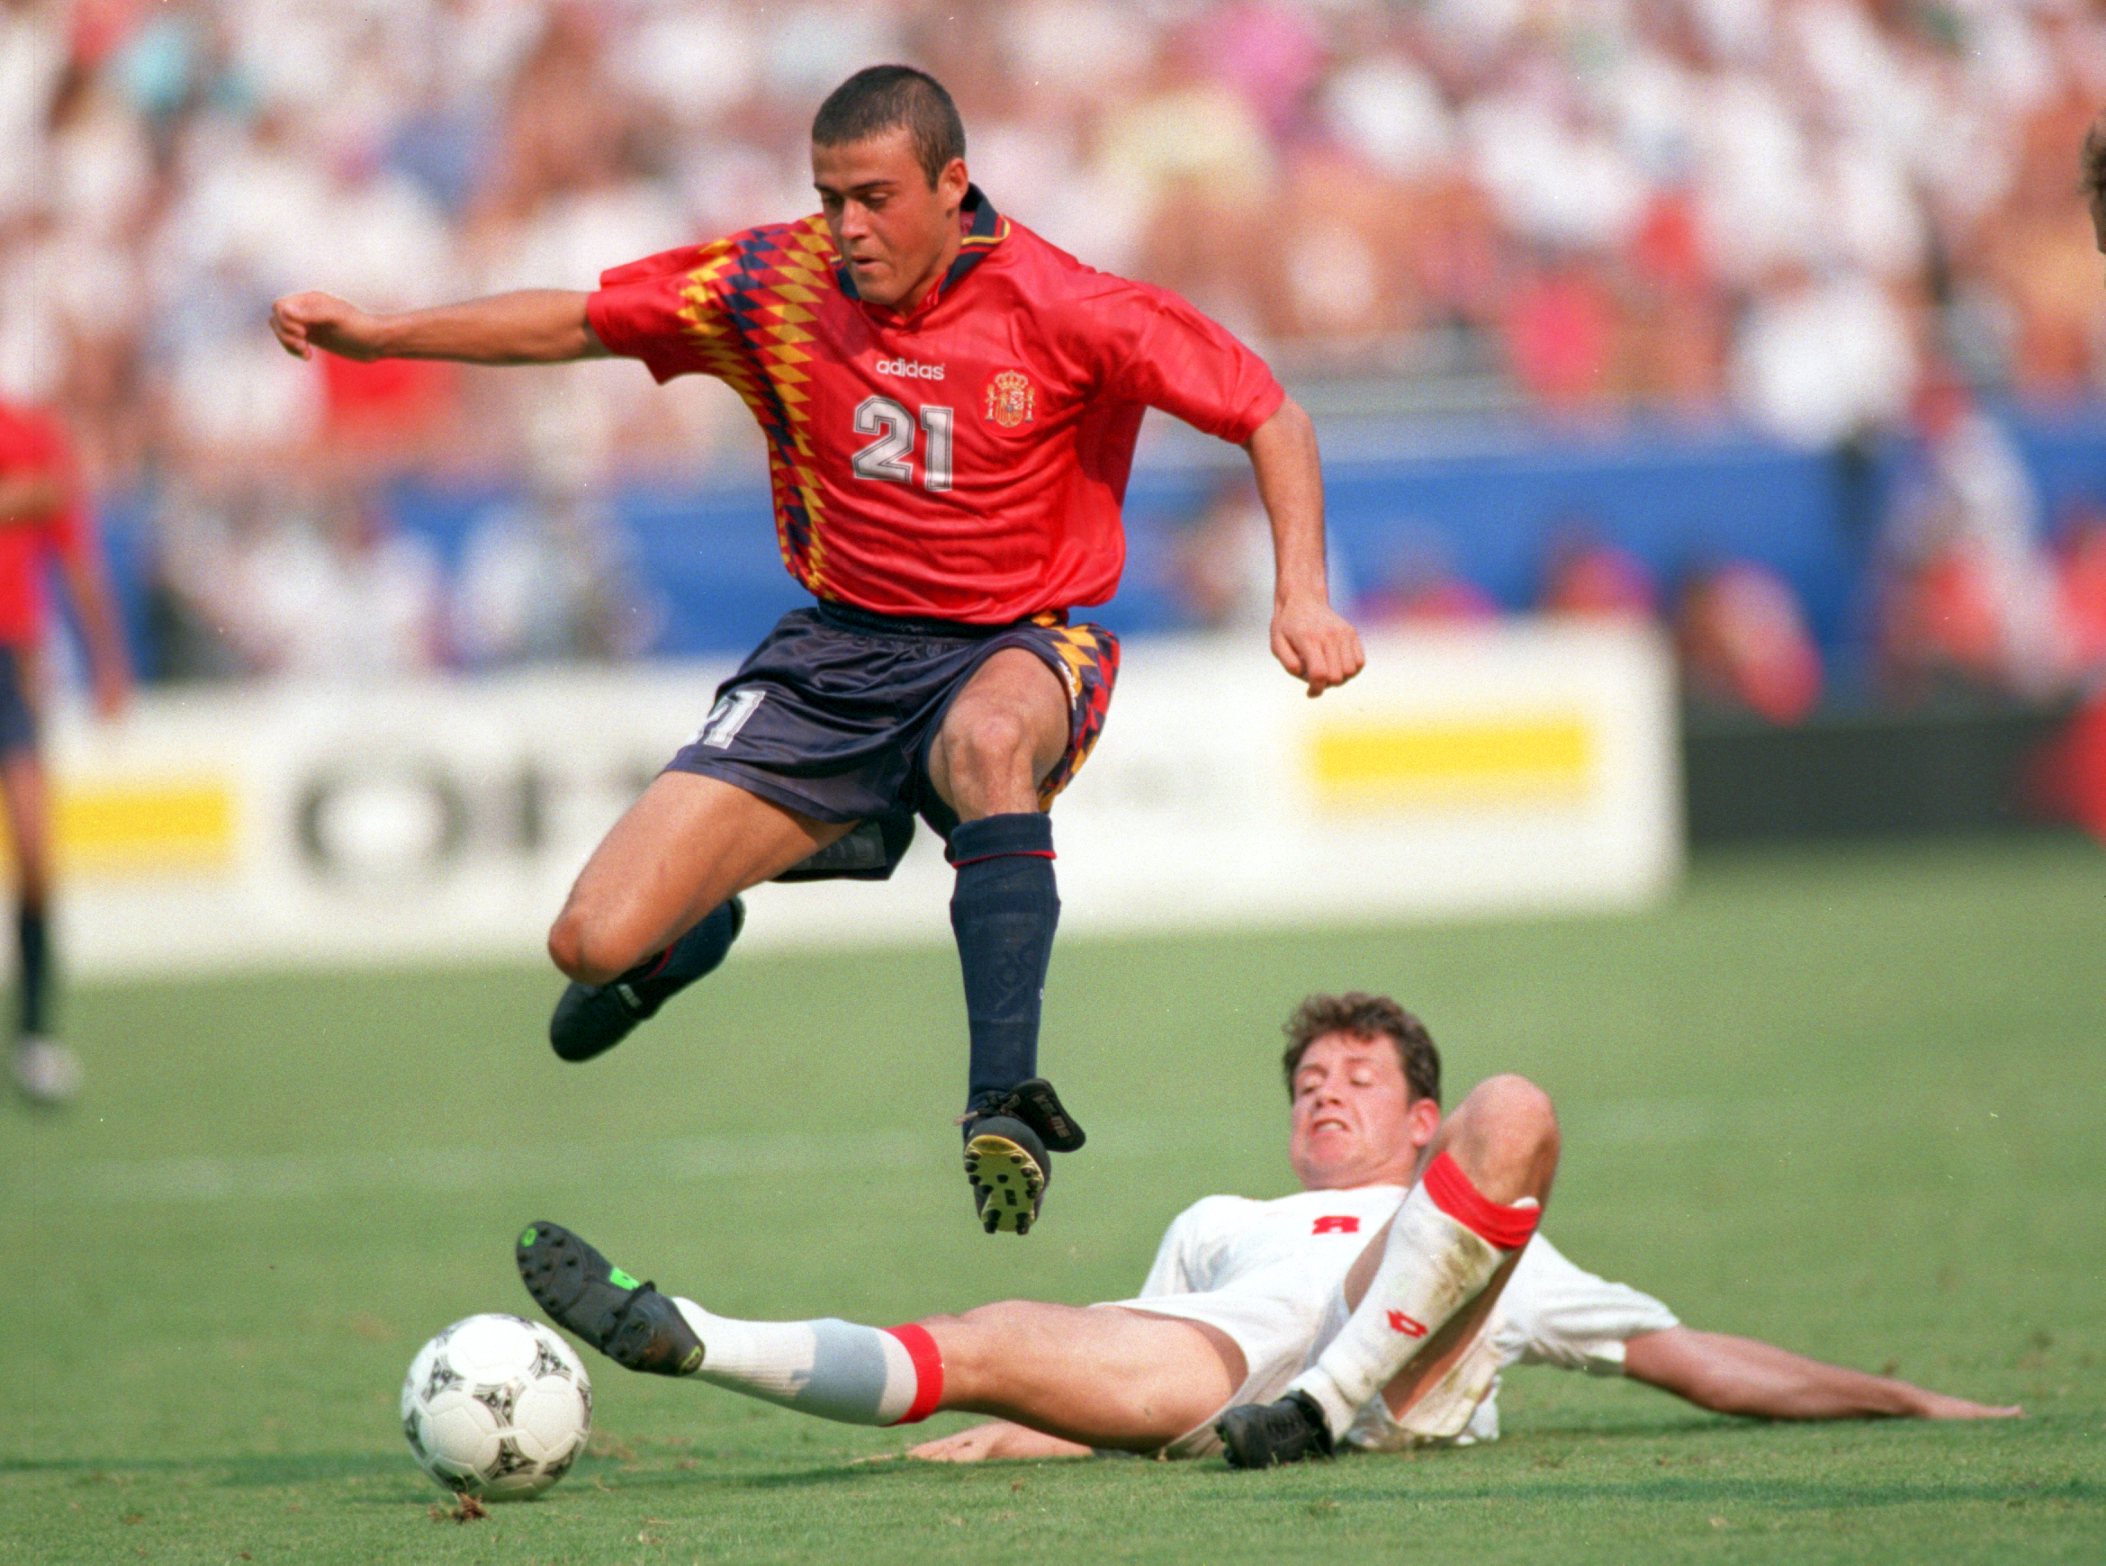 Luis Emrique in action for Spain against Switzerland at the 1994 World Cup.